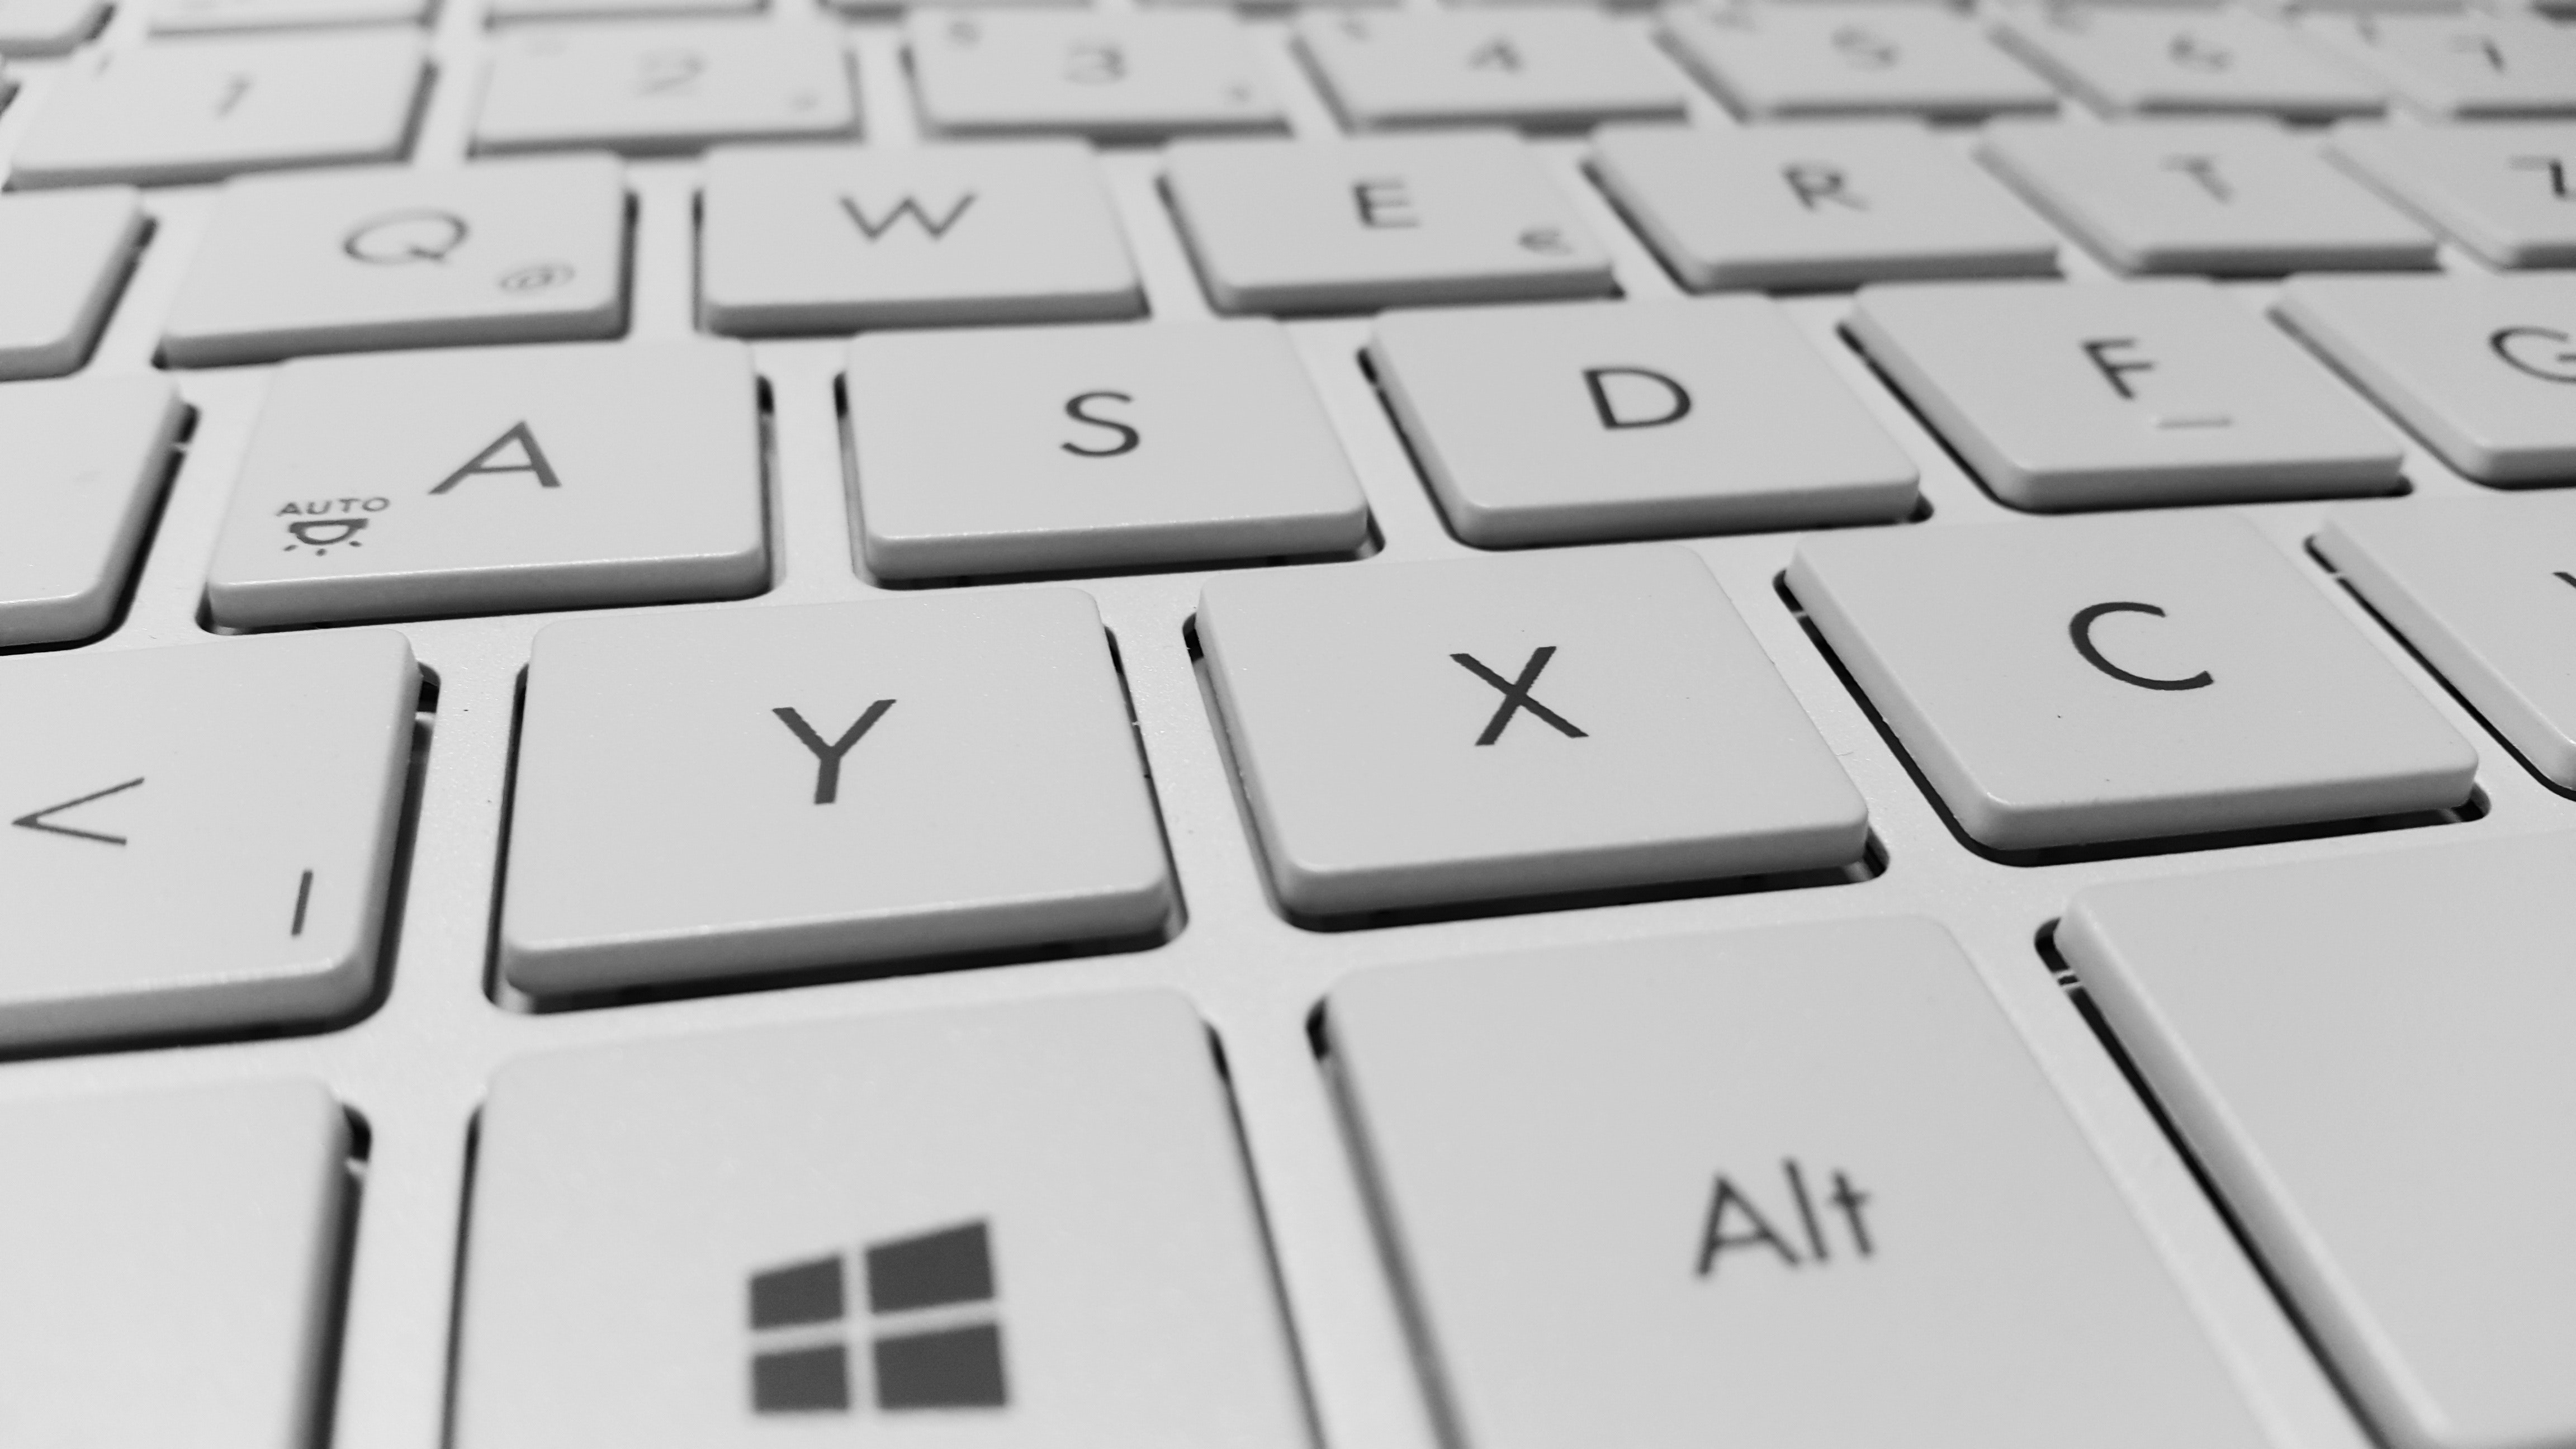 example of hi res image of a computer keyboard